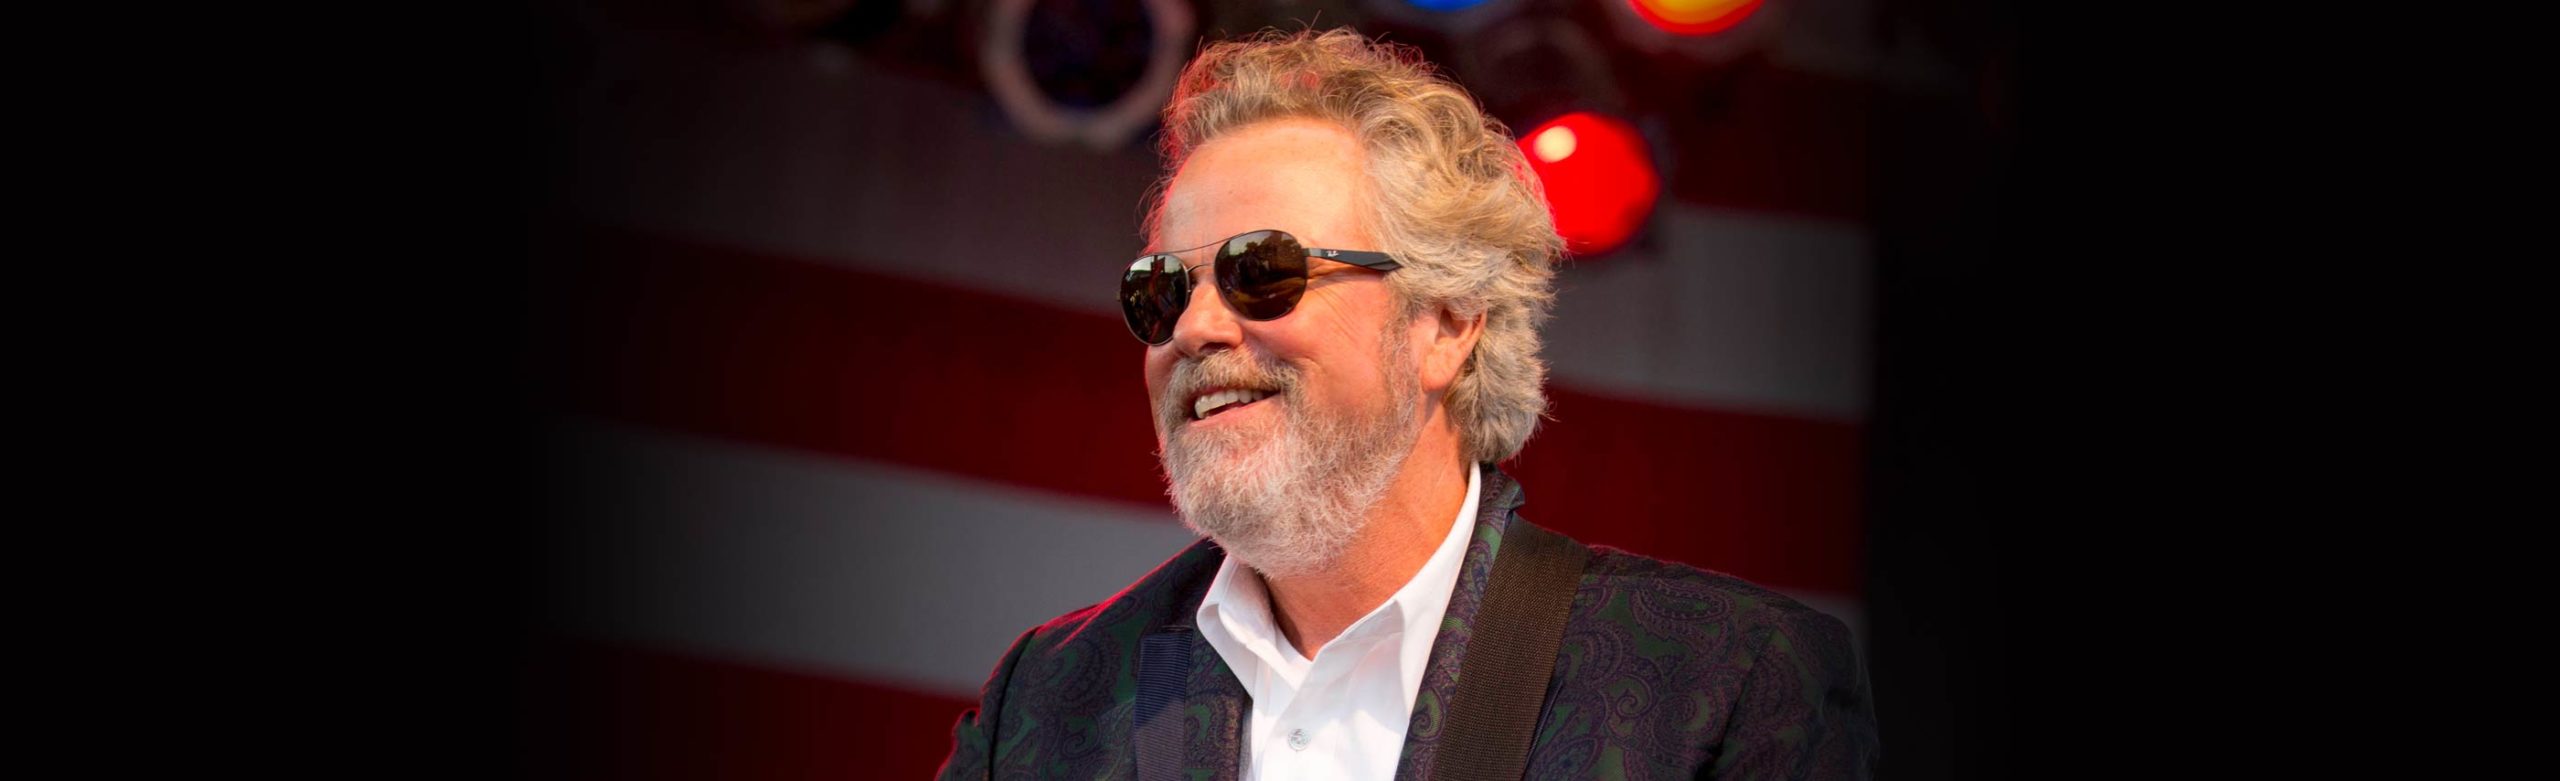 Event Info: Robert Earl Keen at The Wilma Image